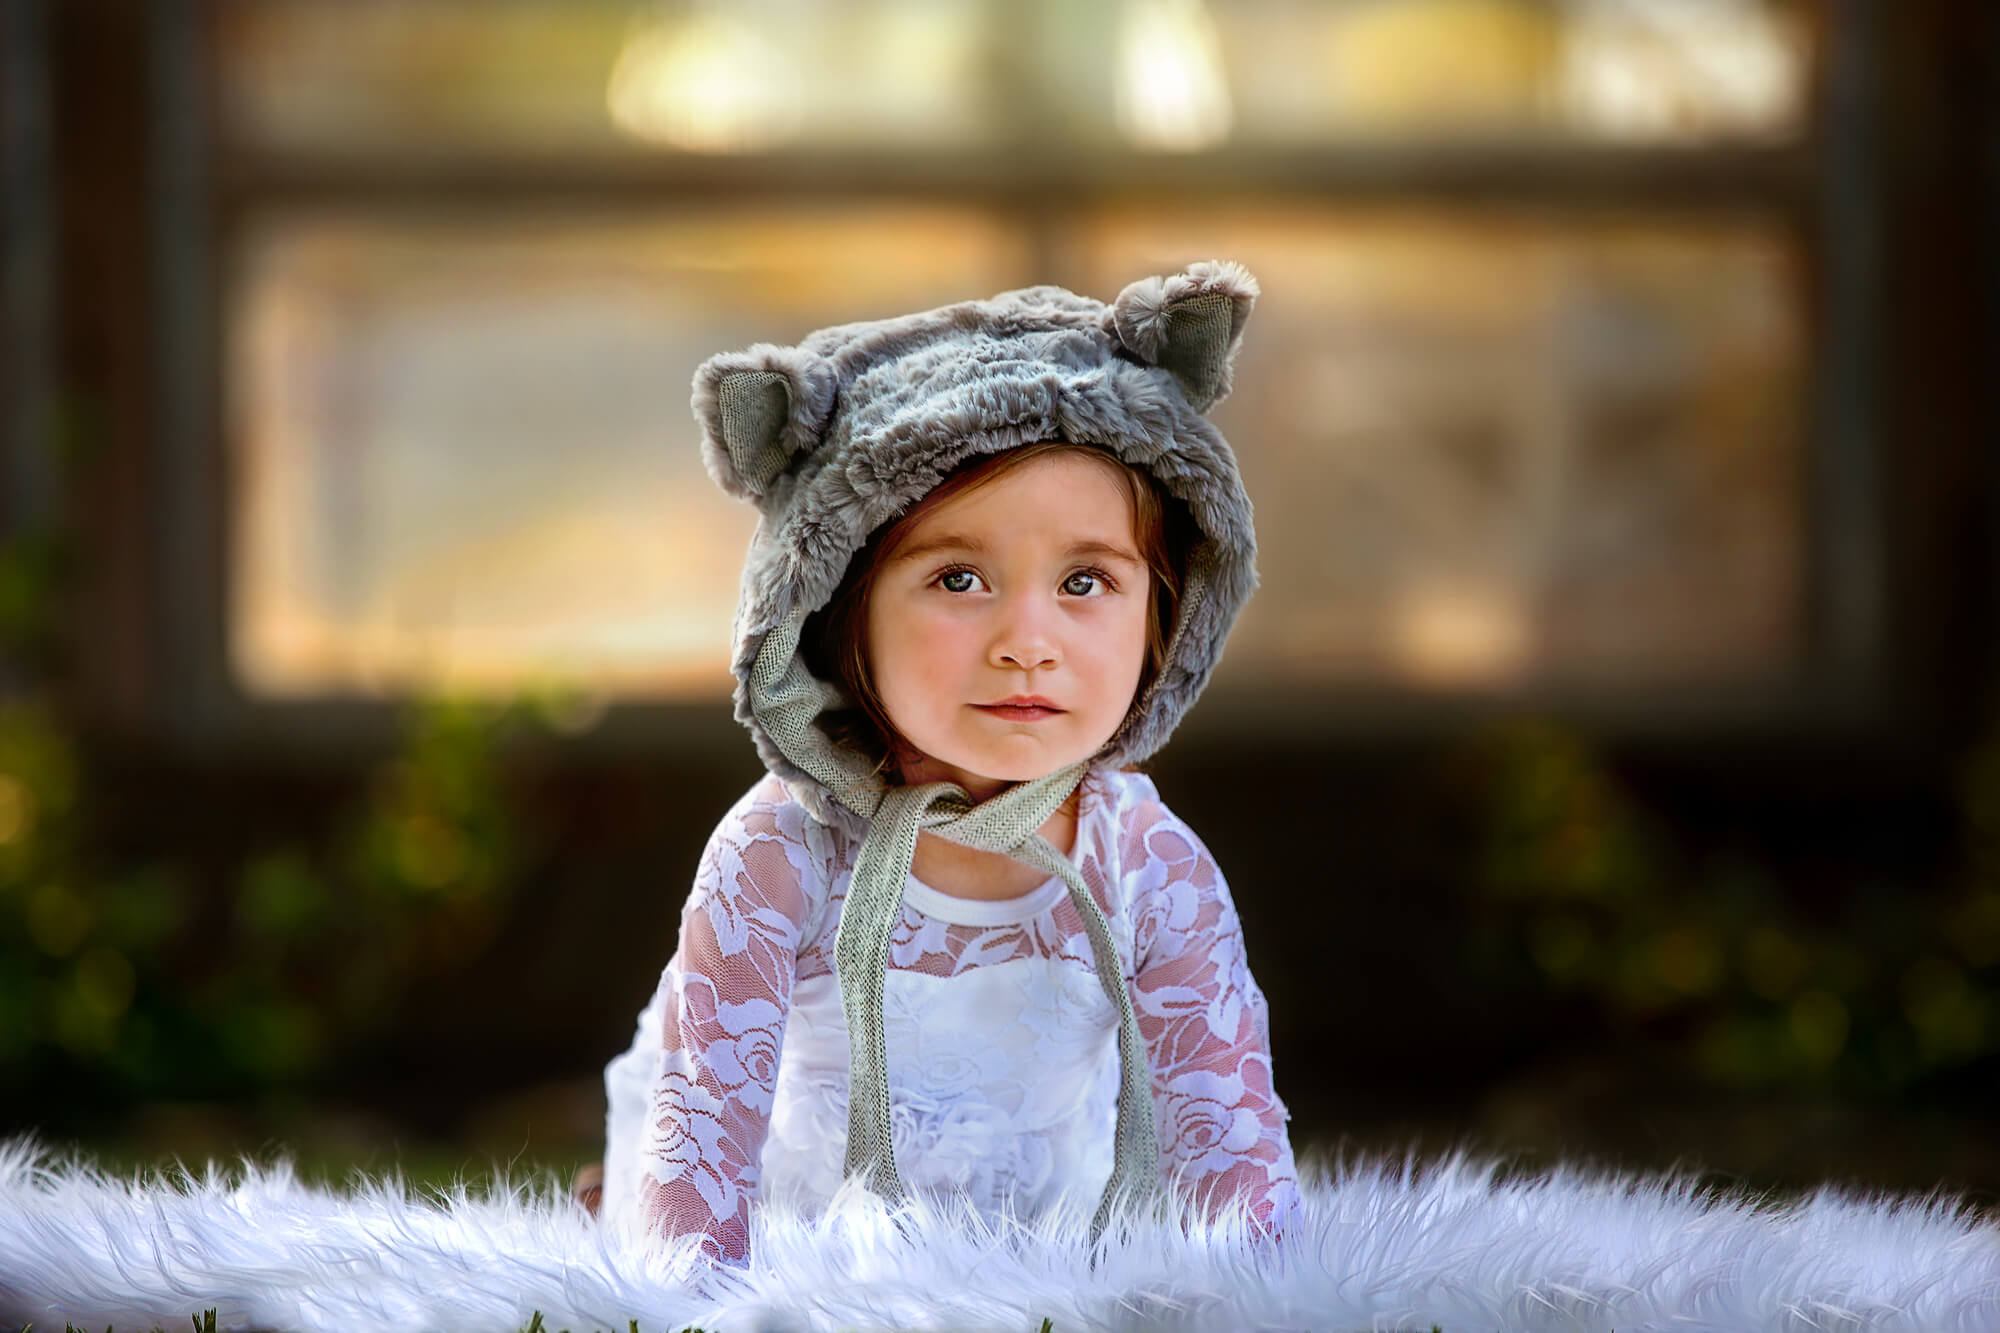 Adorable baby girl wearing a stylish outfit and furry bonnet from Baby Depot Houston.